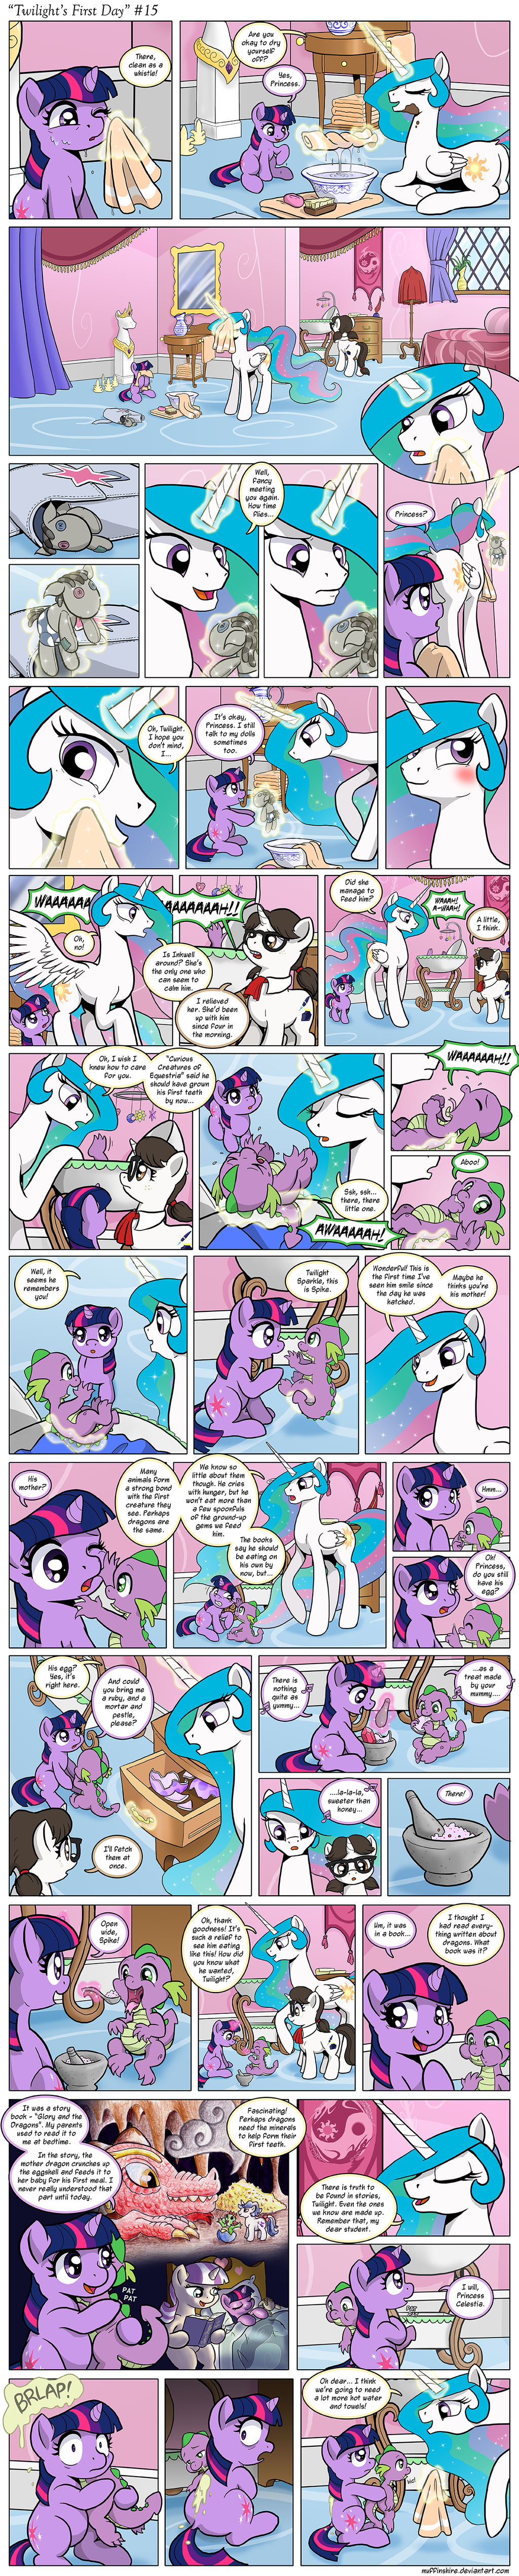 comic___twilight_s_first_day__15_by_muff